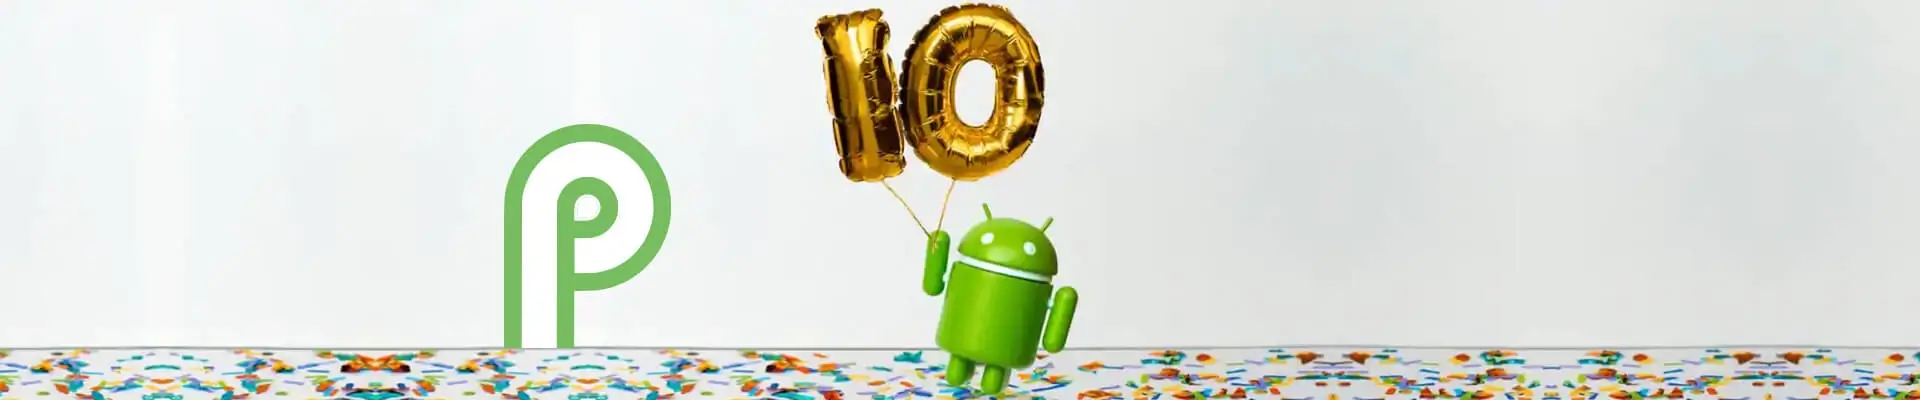 Google Celebrated 10th Birthday Of Android By Introducing Android P